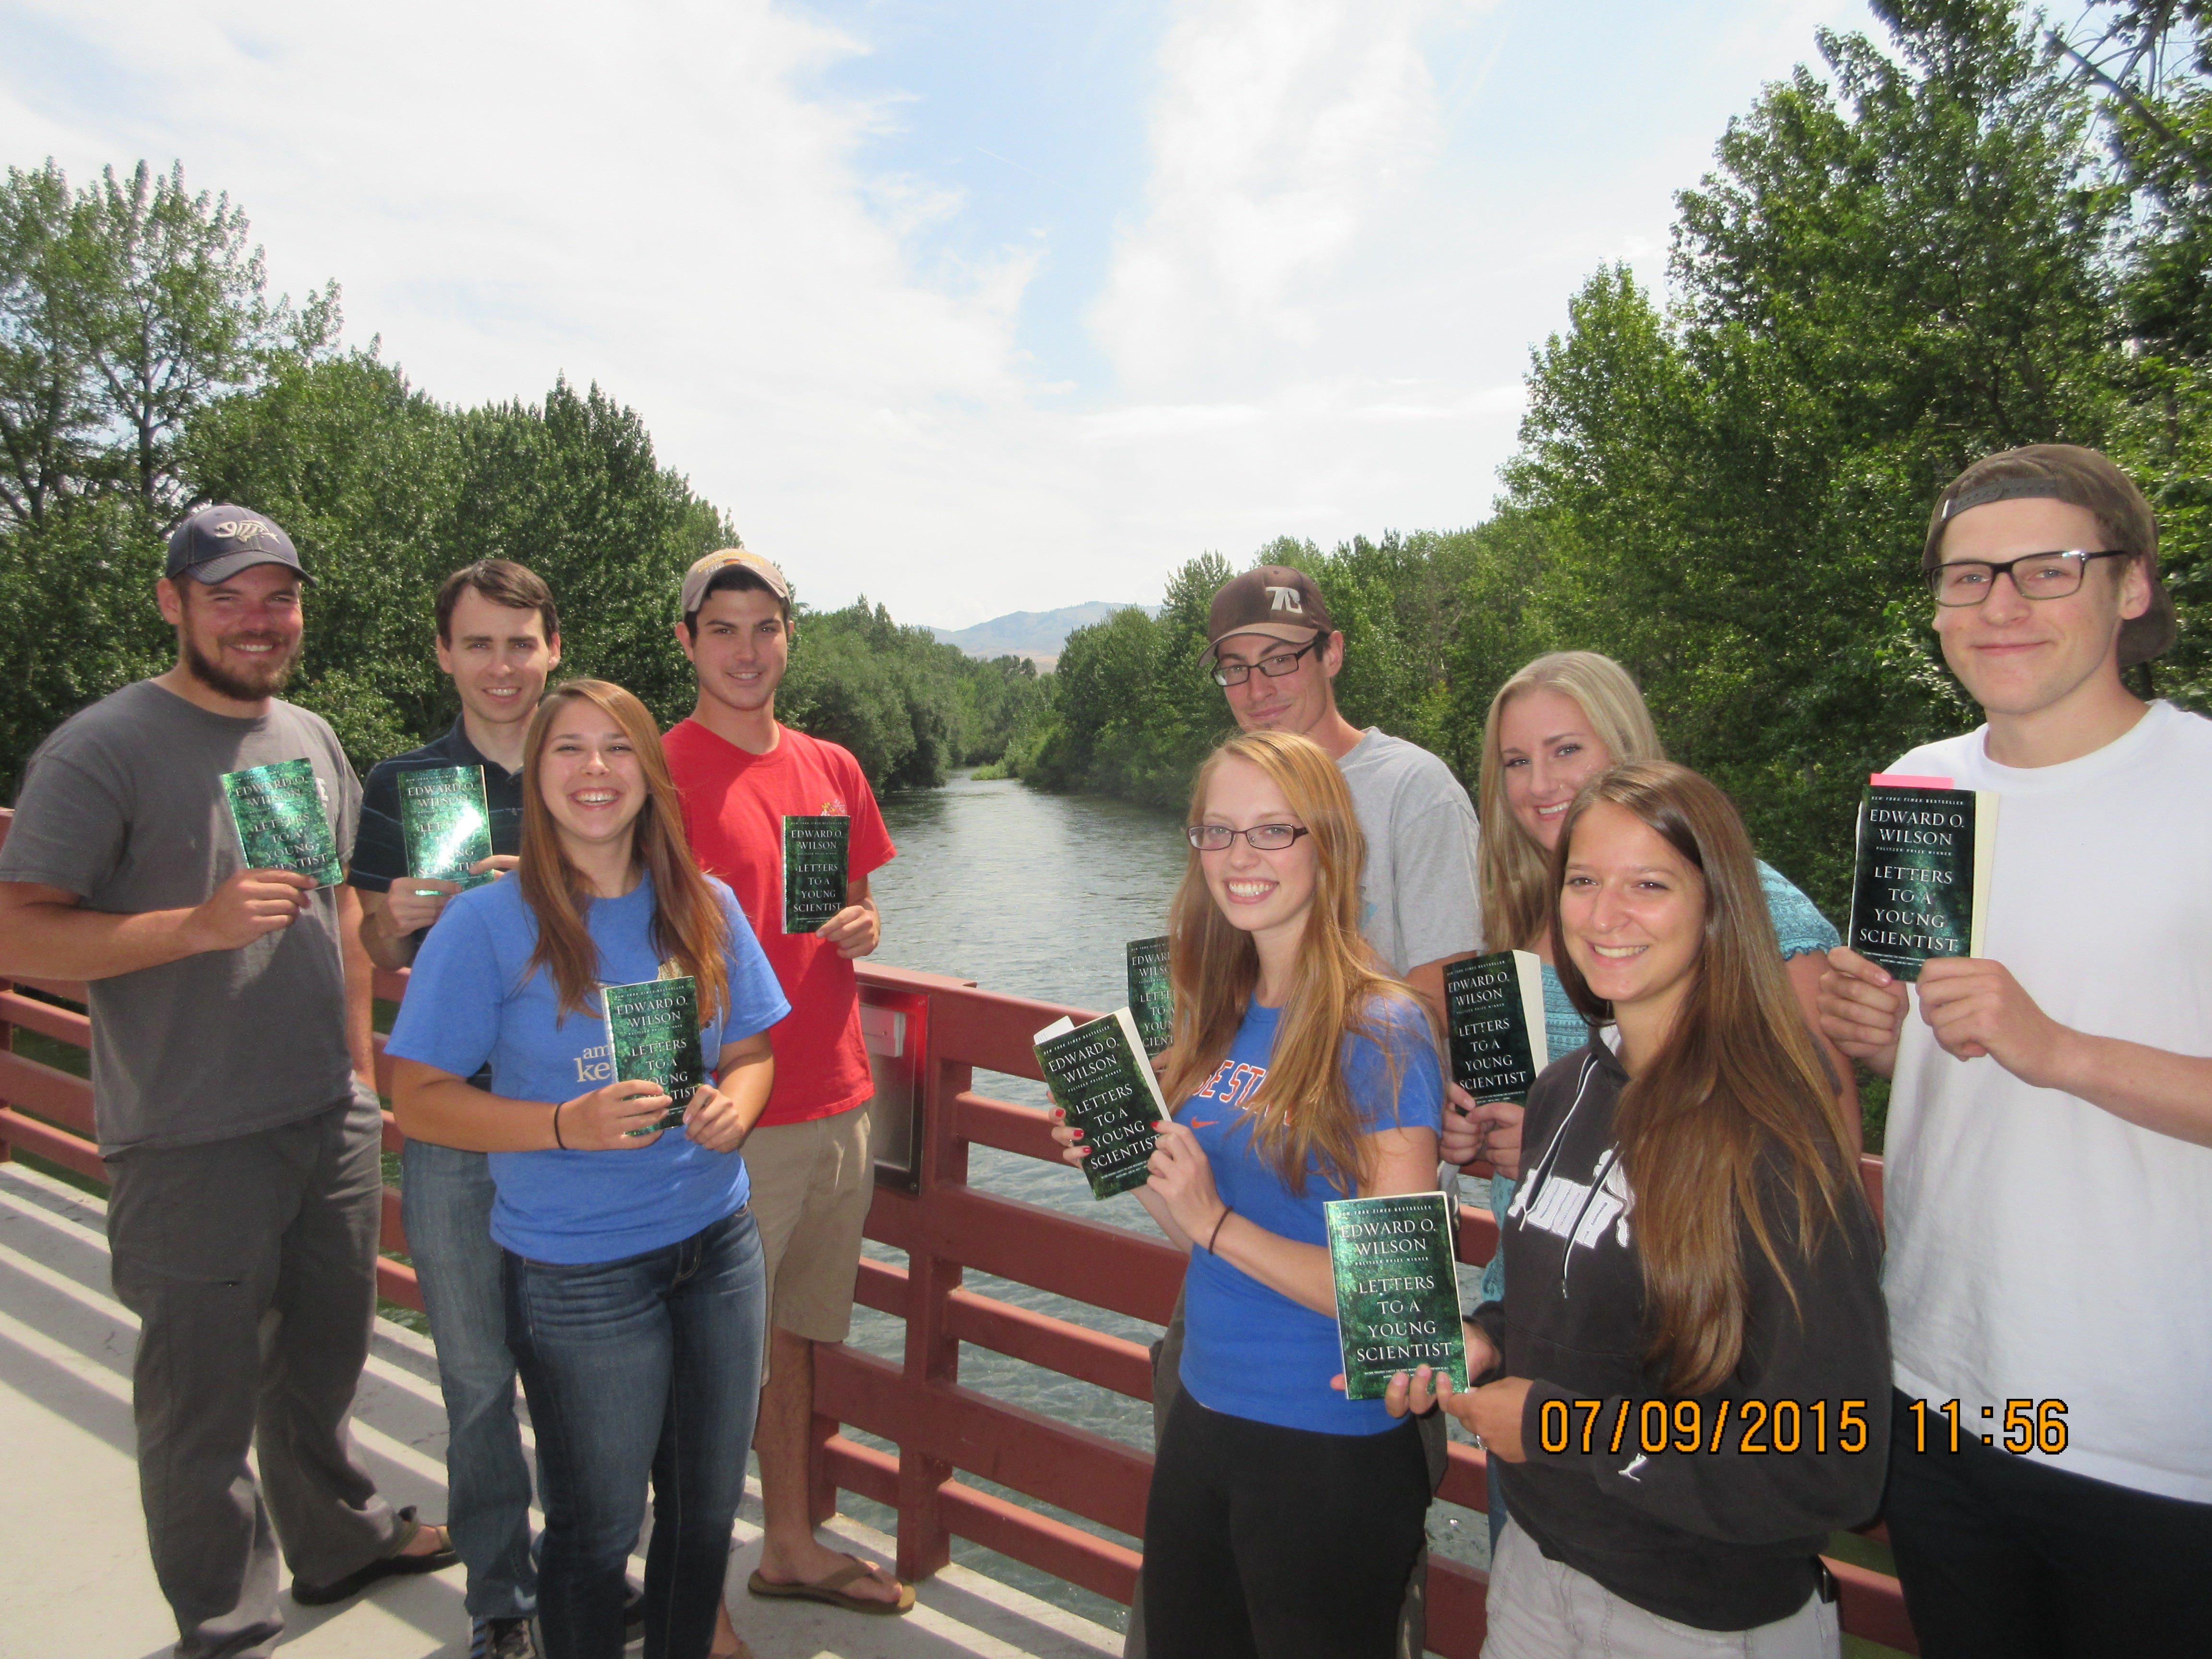 Students standing together on a bridge over the Boise River holding books